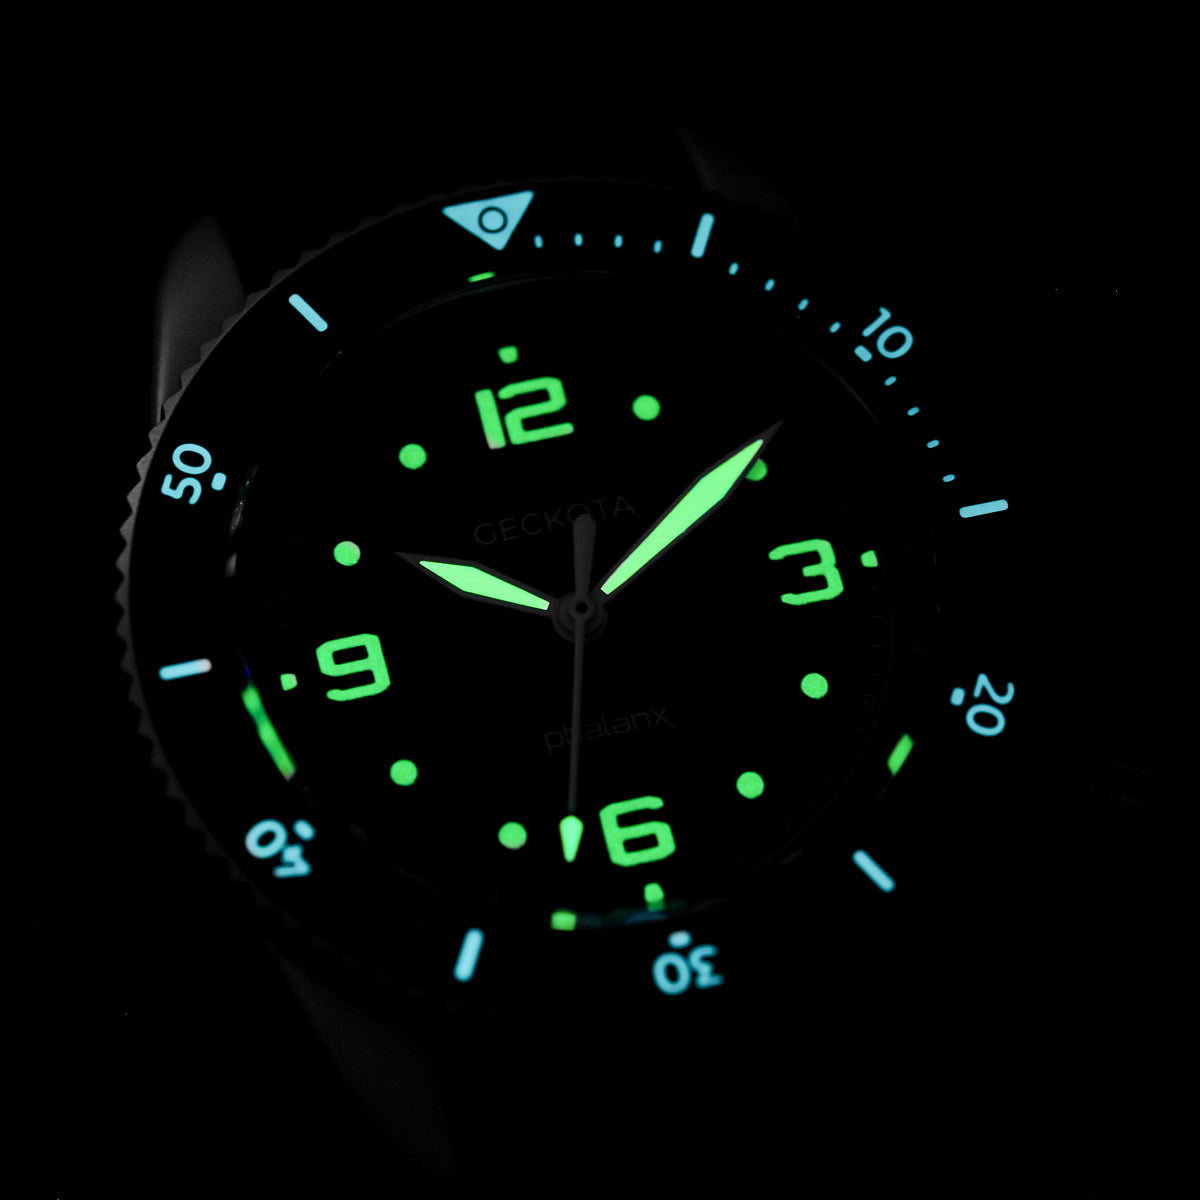 Geckota S-01 Phalanx Special Operations Watch / "Intelligence" Tactical Set - additional image 1